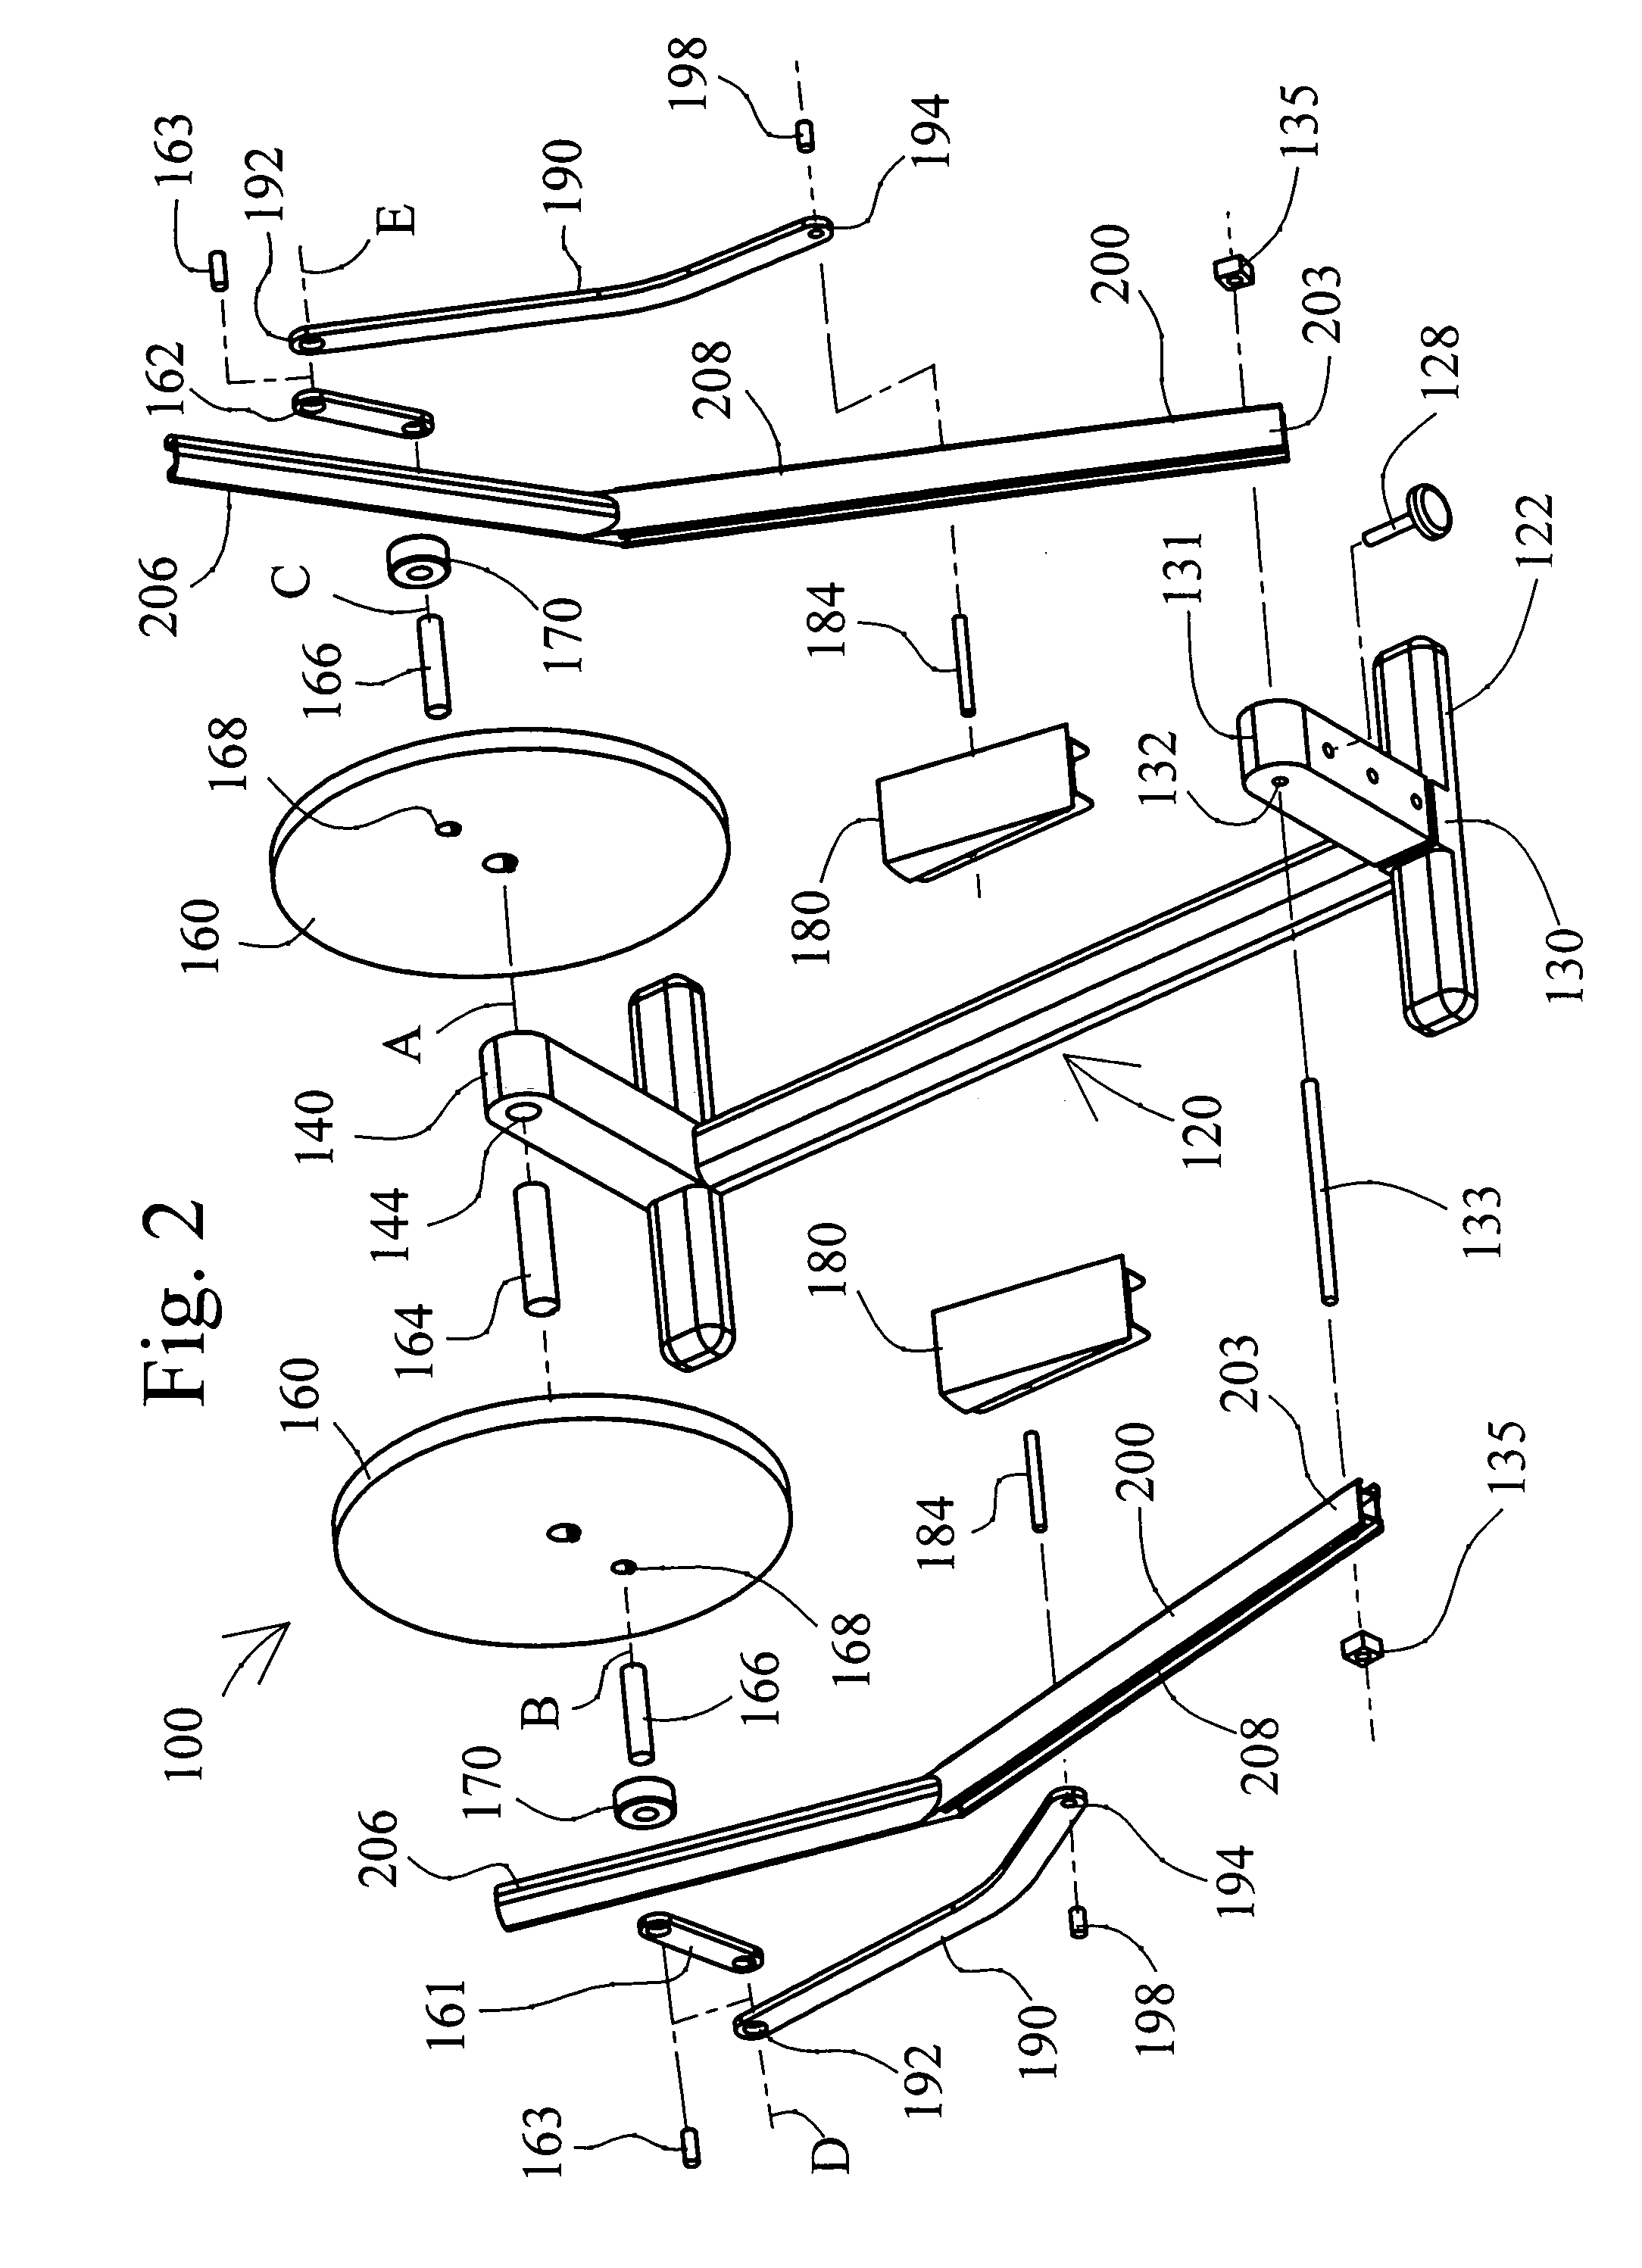 Exercise methods and apparatus